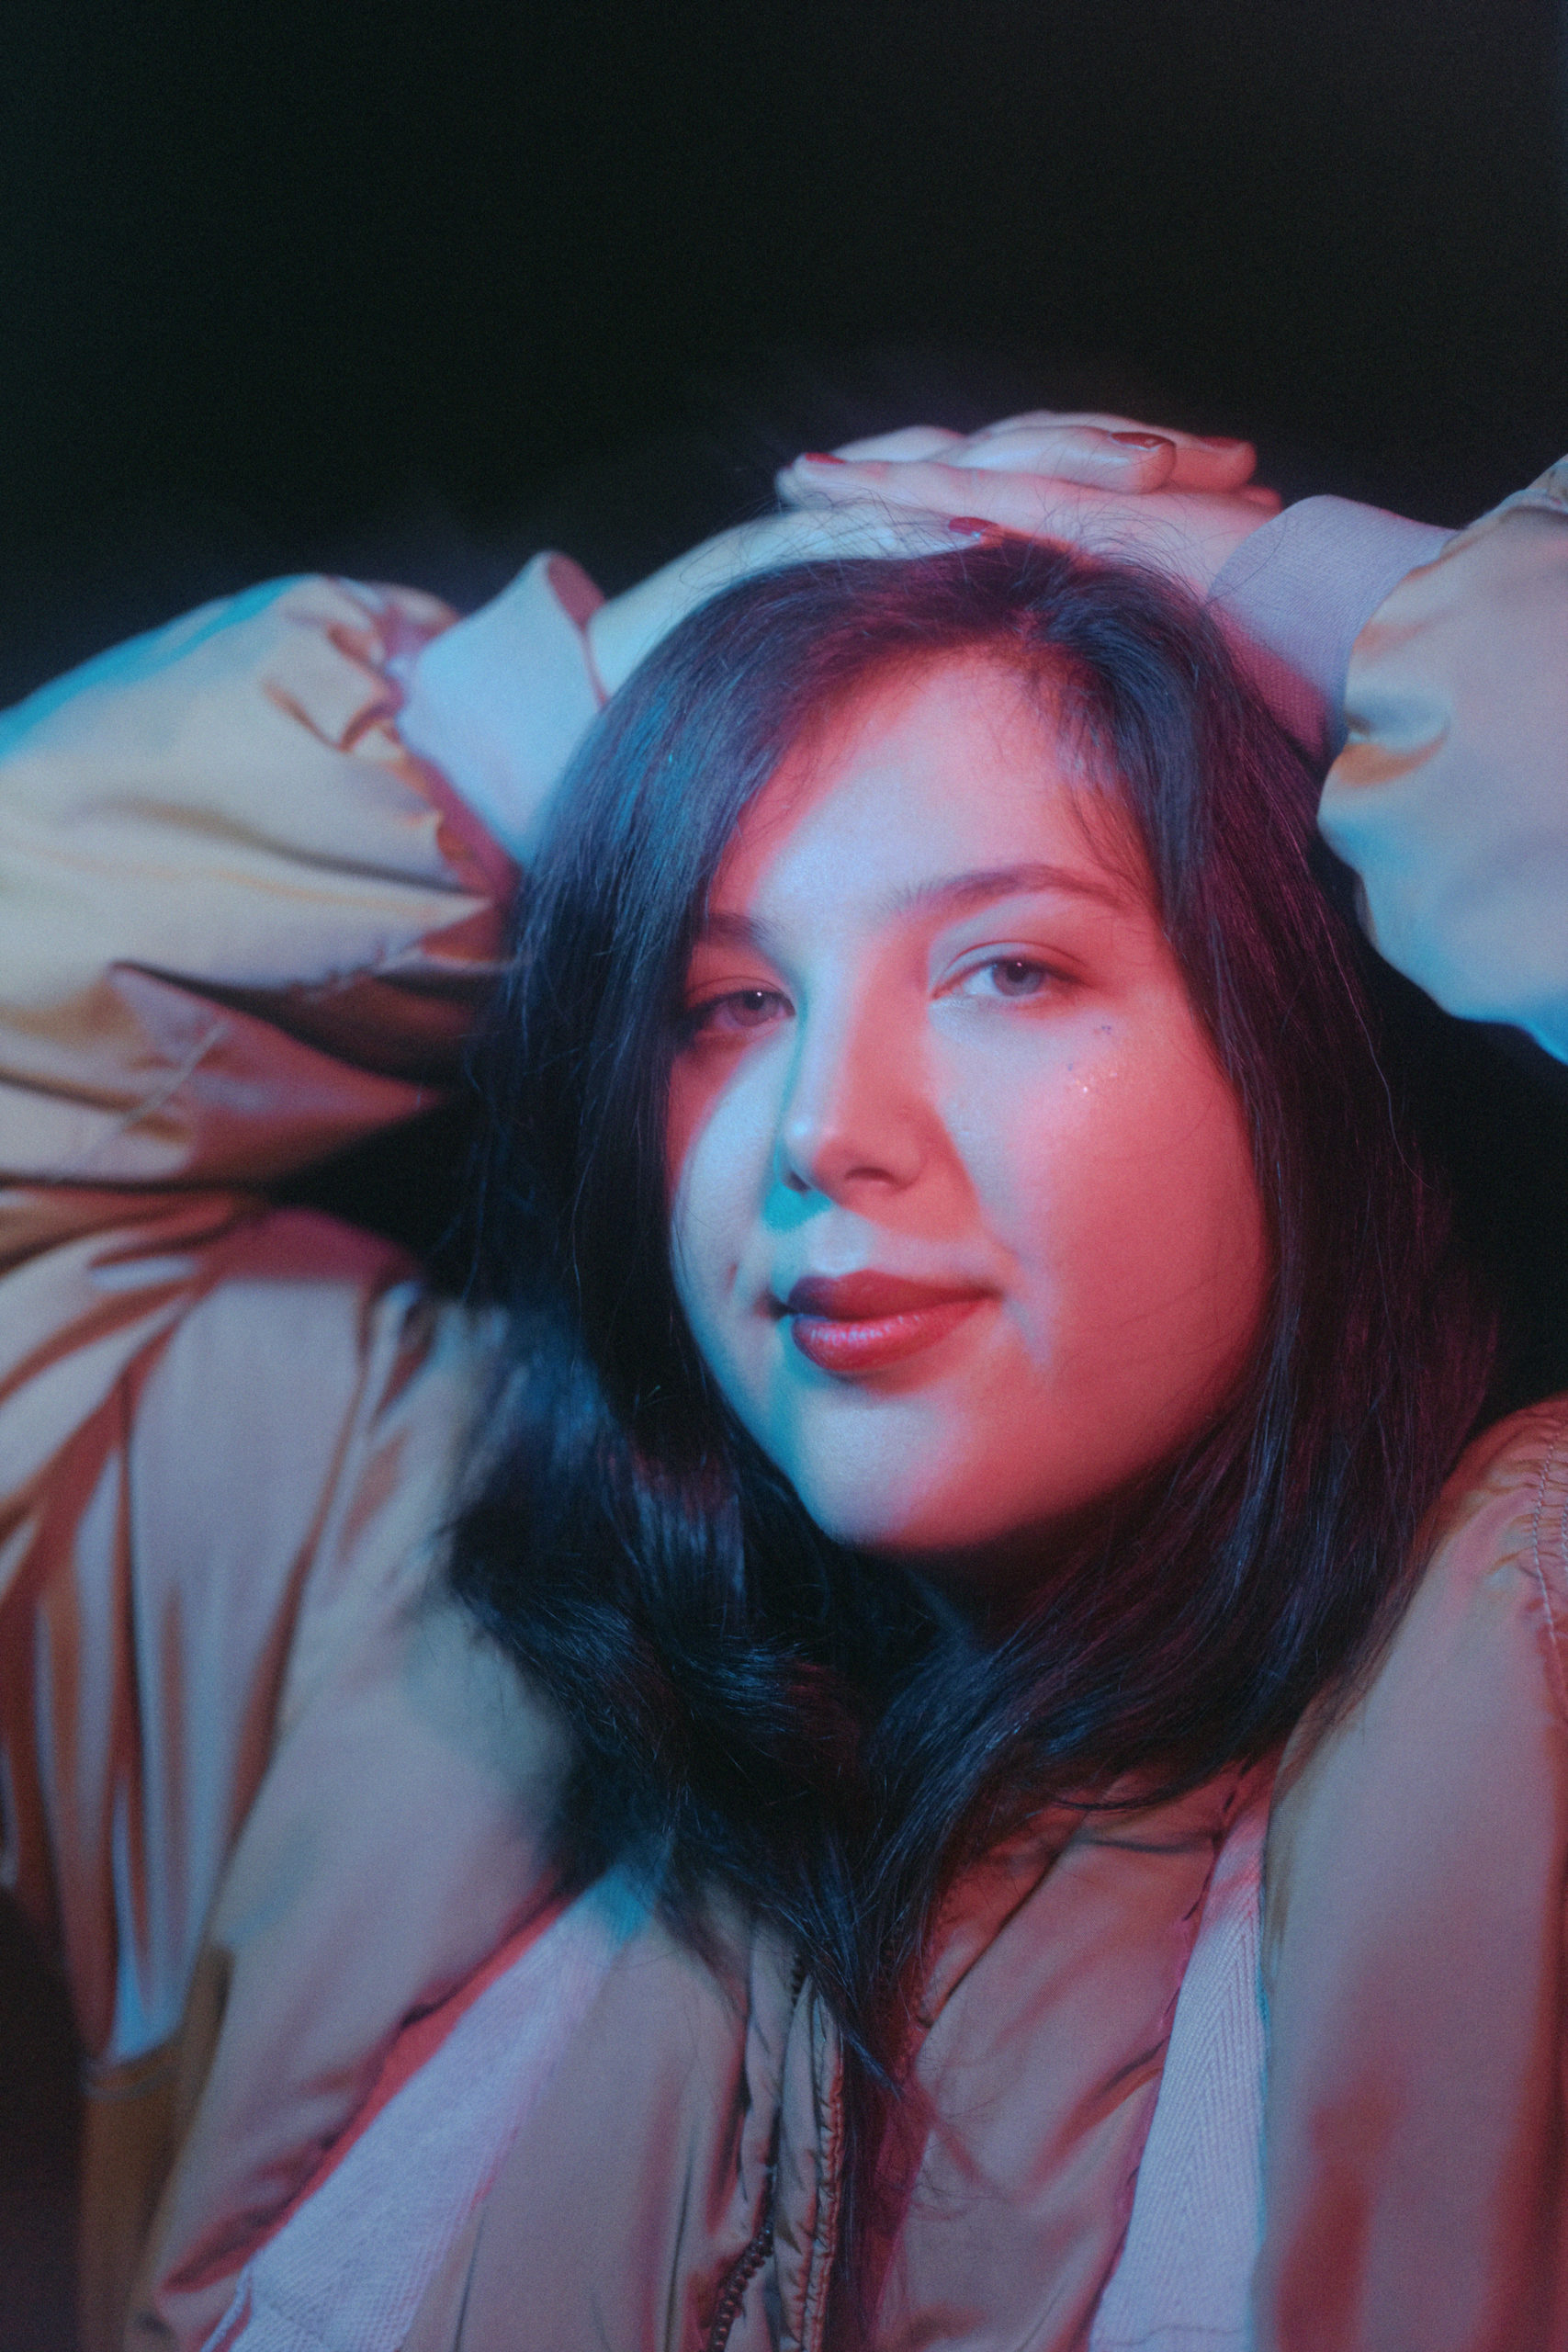 The cover queen is back. Indie musician Lucy Dacus put her spin on two iconic Carole King songs: "Home Again" and "It's Too Late." 